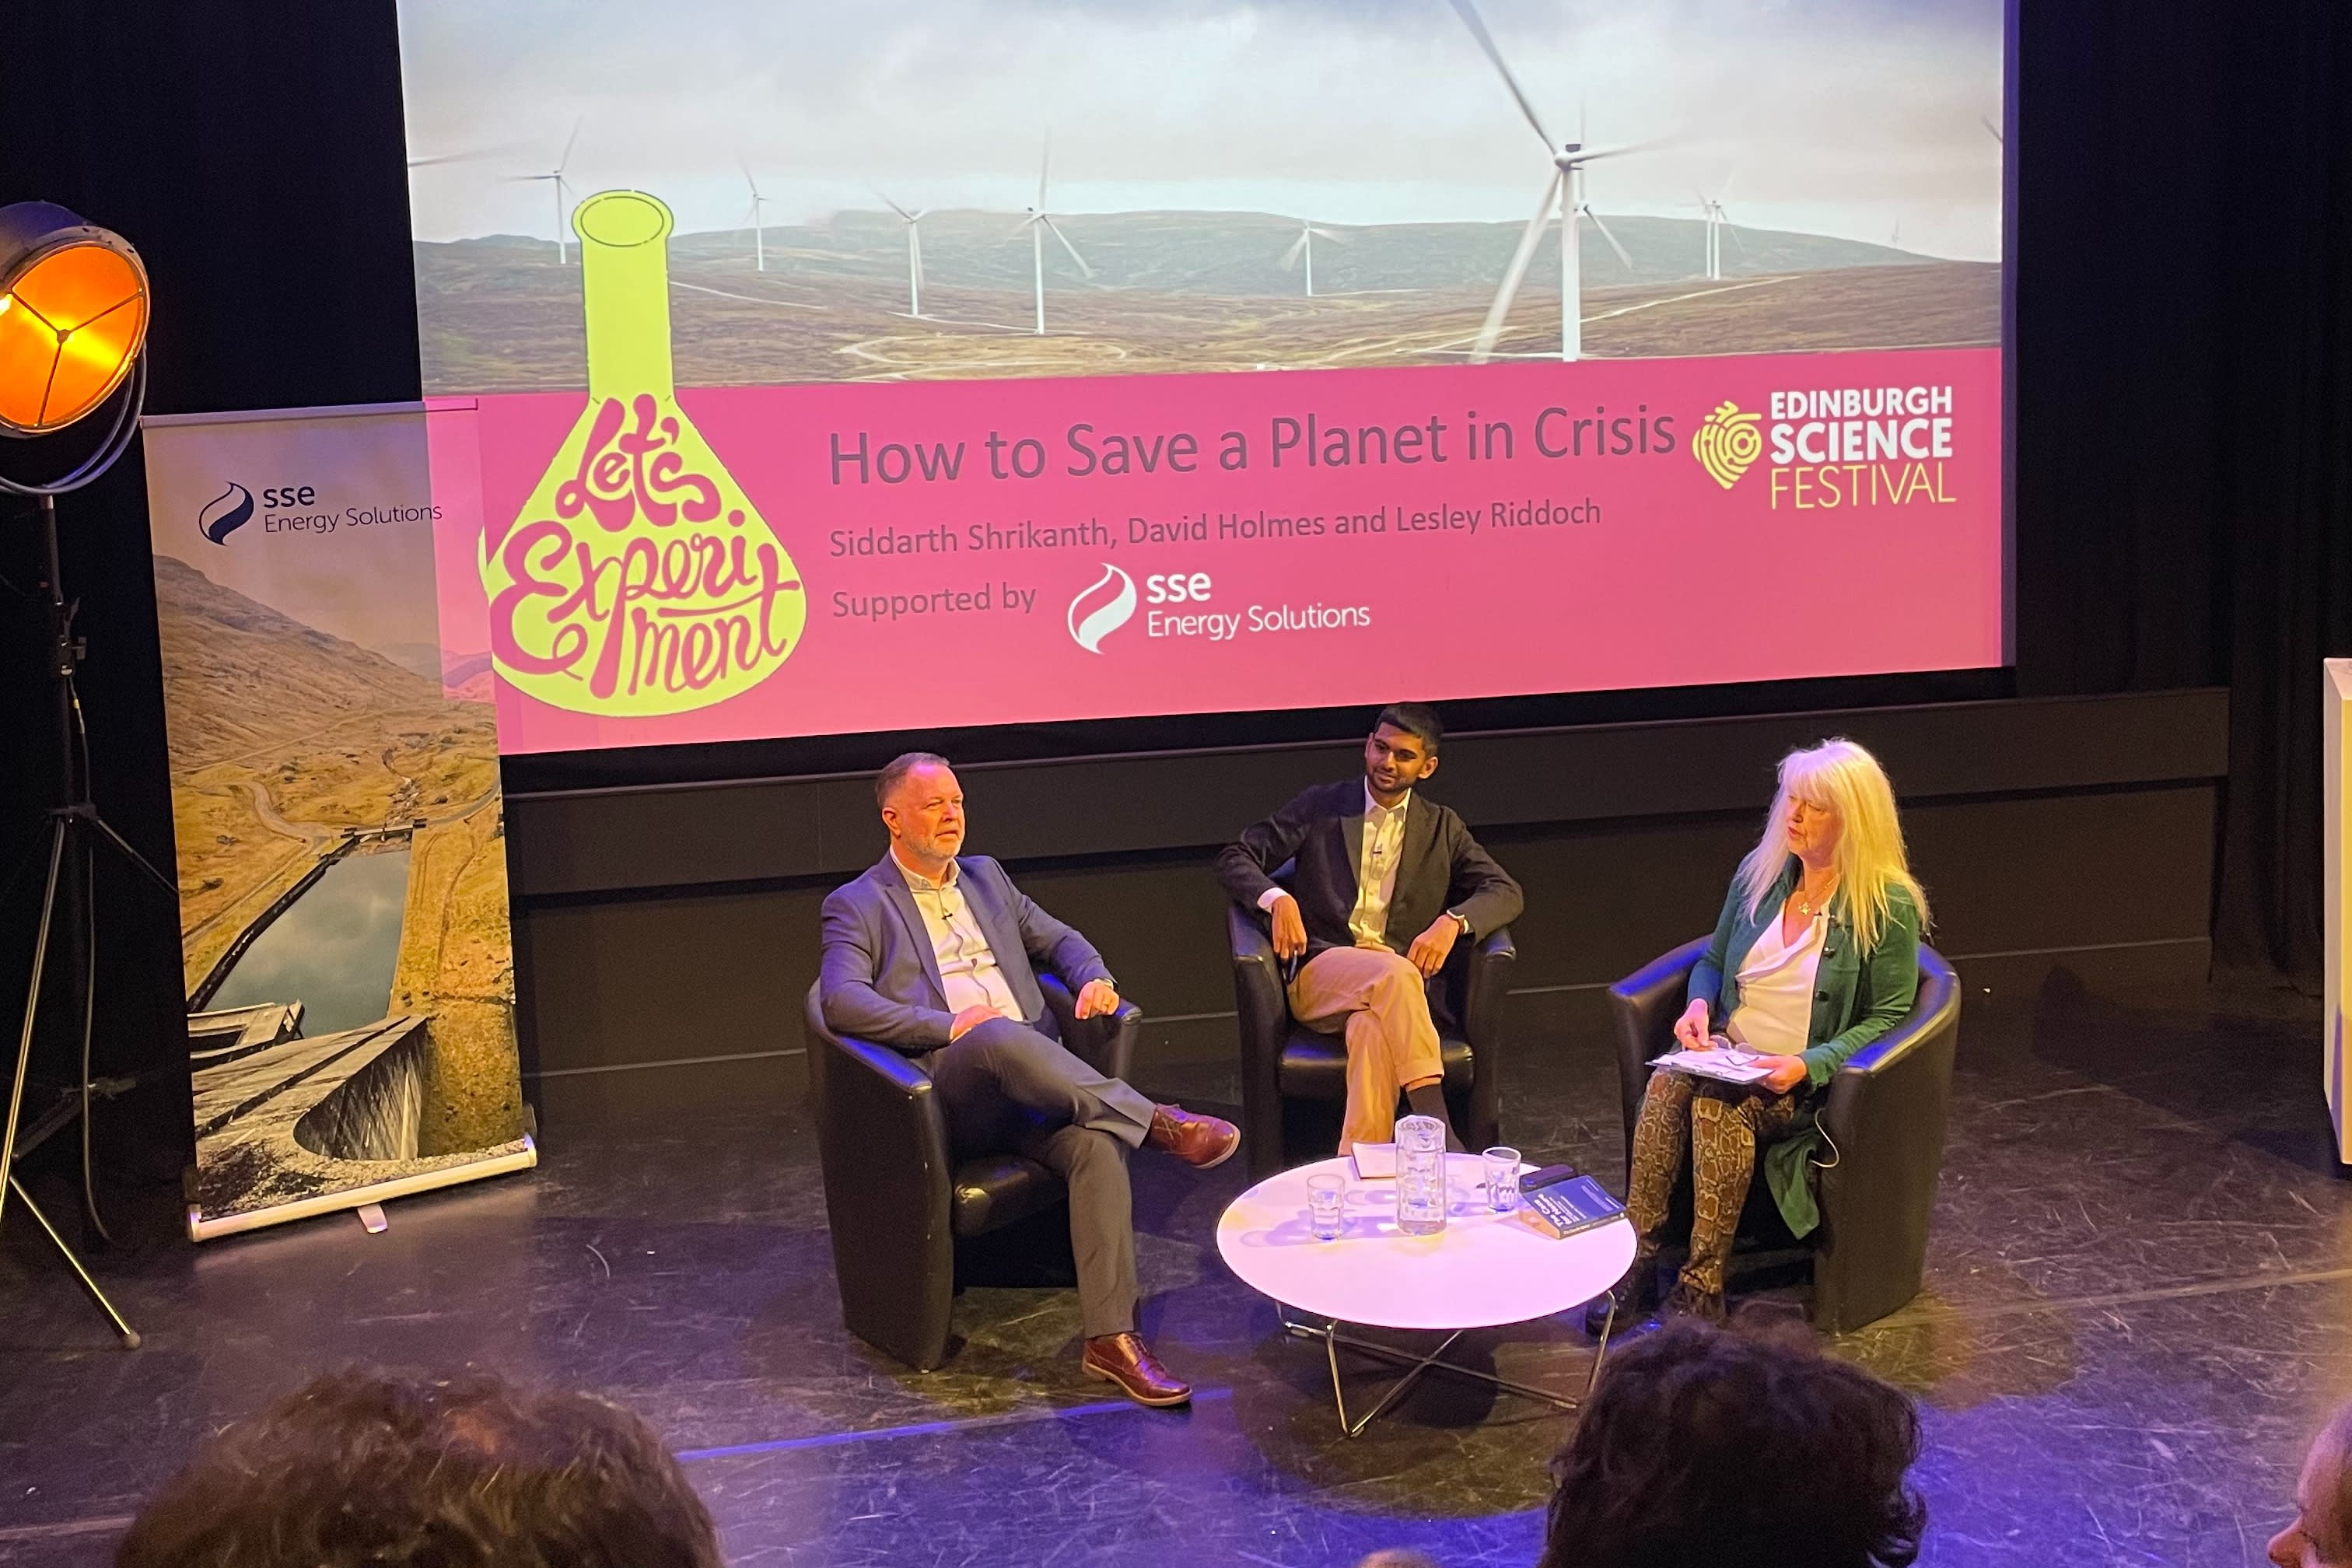 Image of David Holmes, Siddarth Shrikanth and Lesley Riddoch on stage in front of a screen at an Edinburgh Science Festival Event 